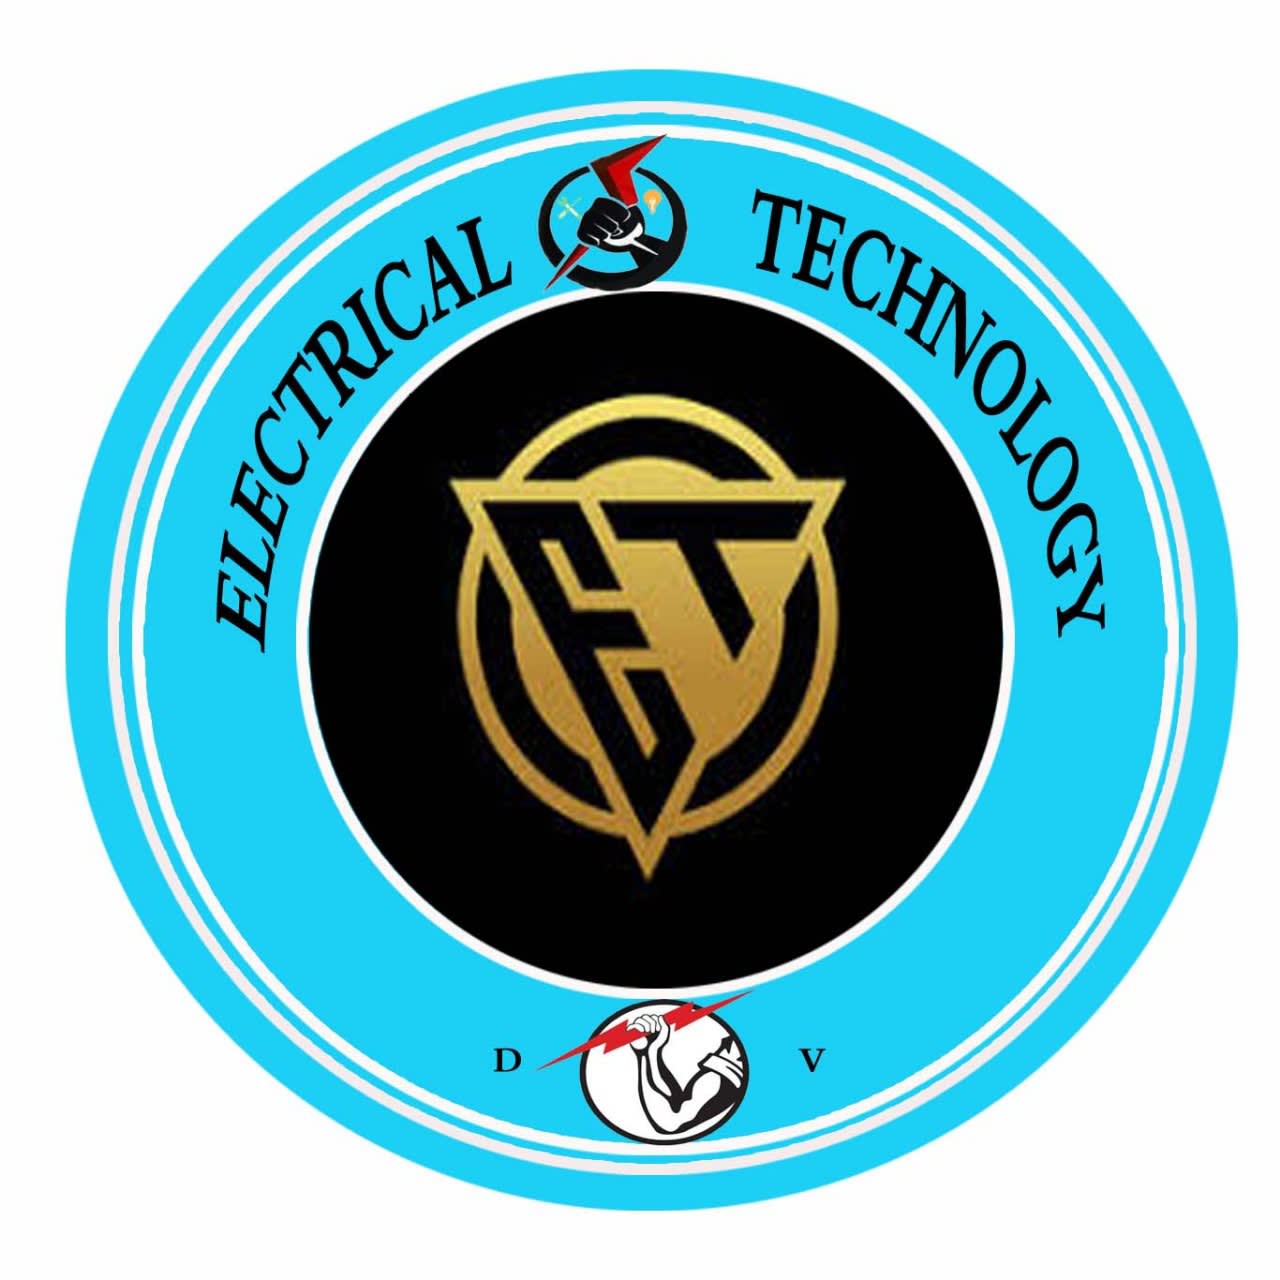 Electrical Technology Tamil